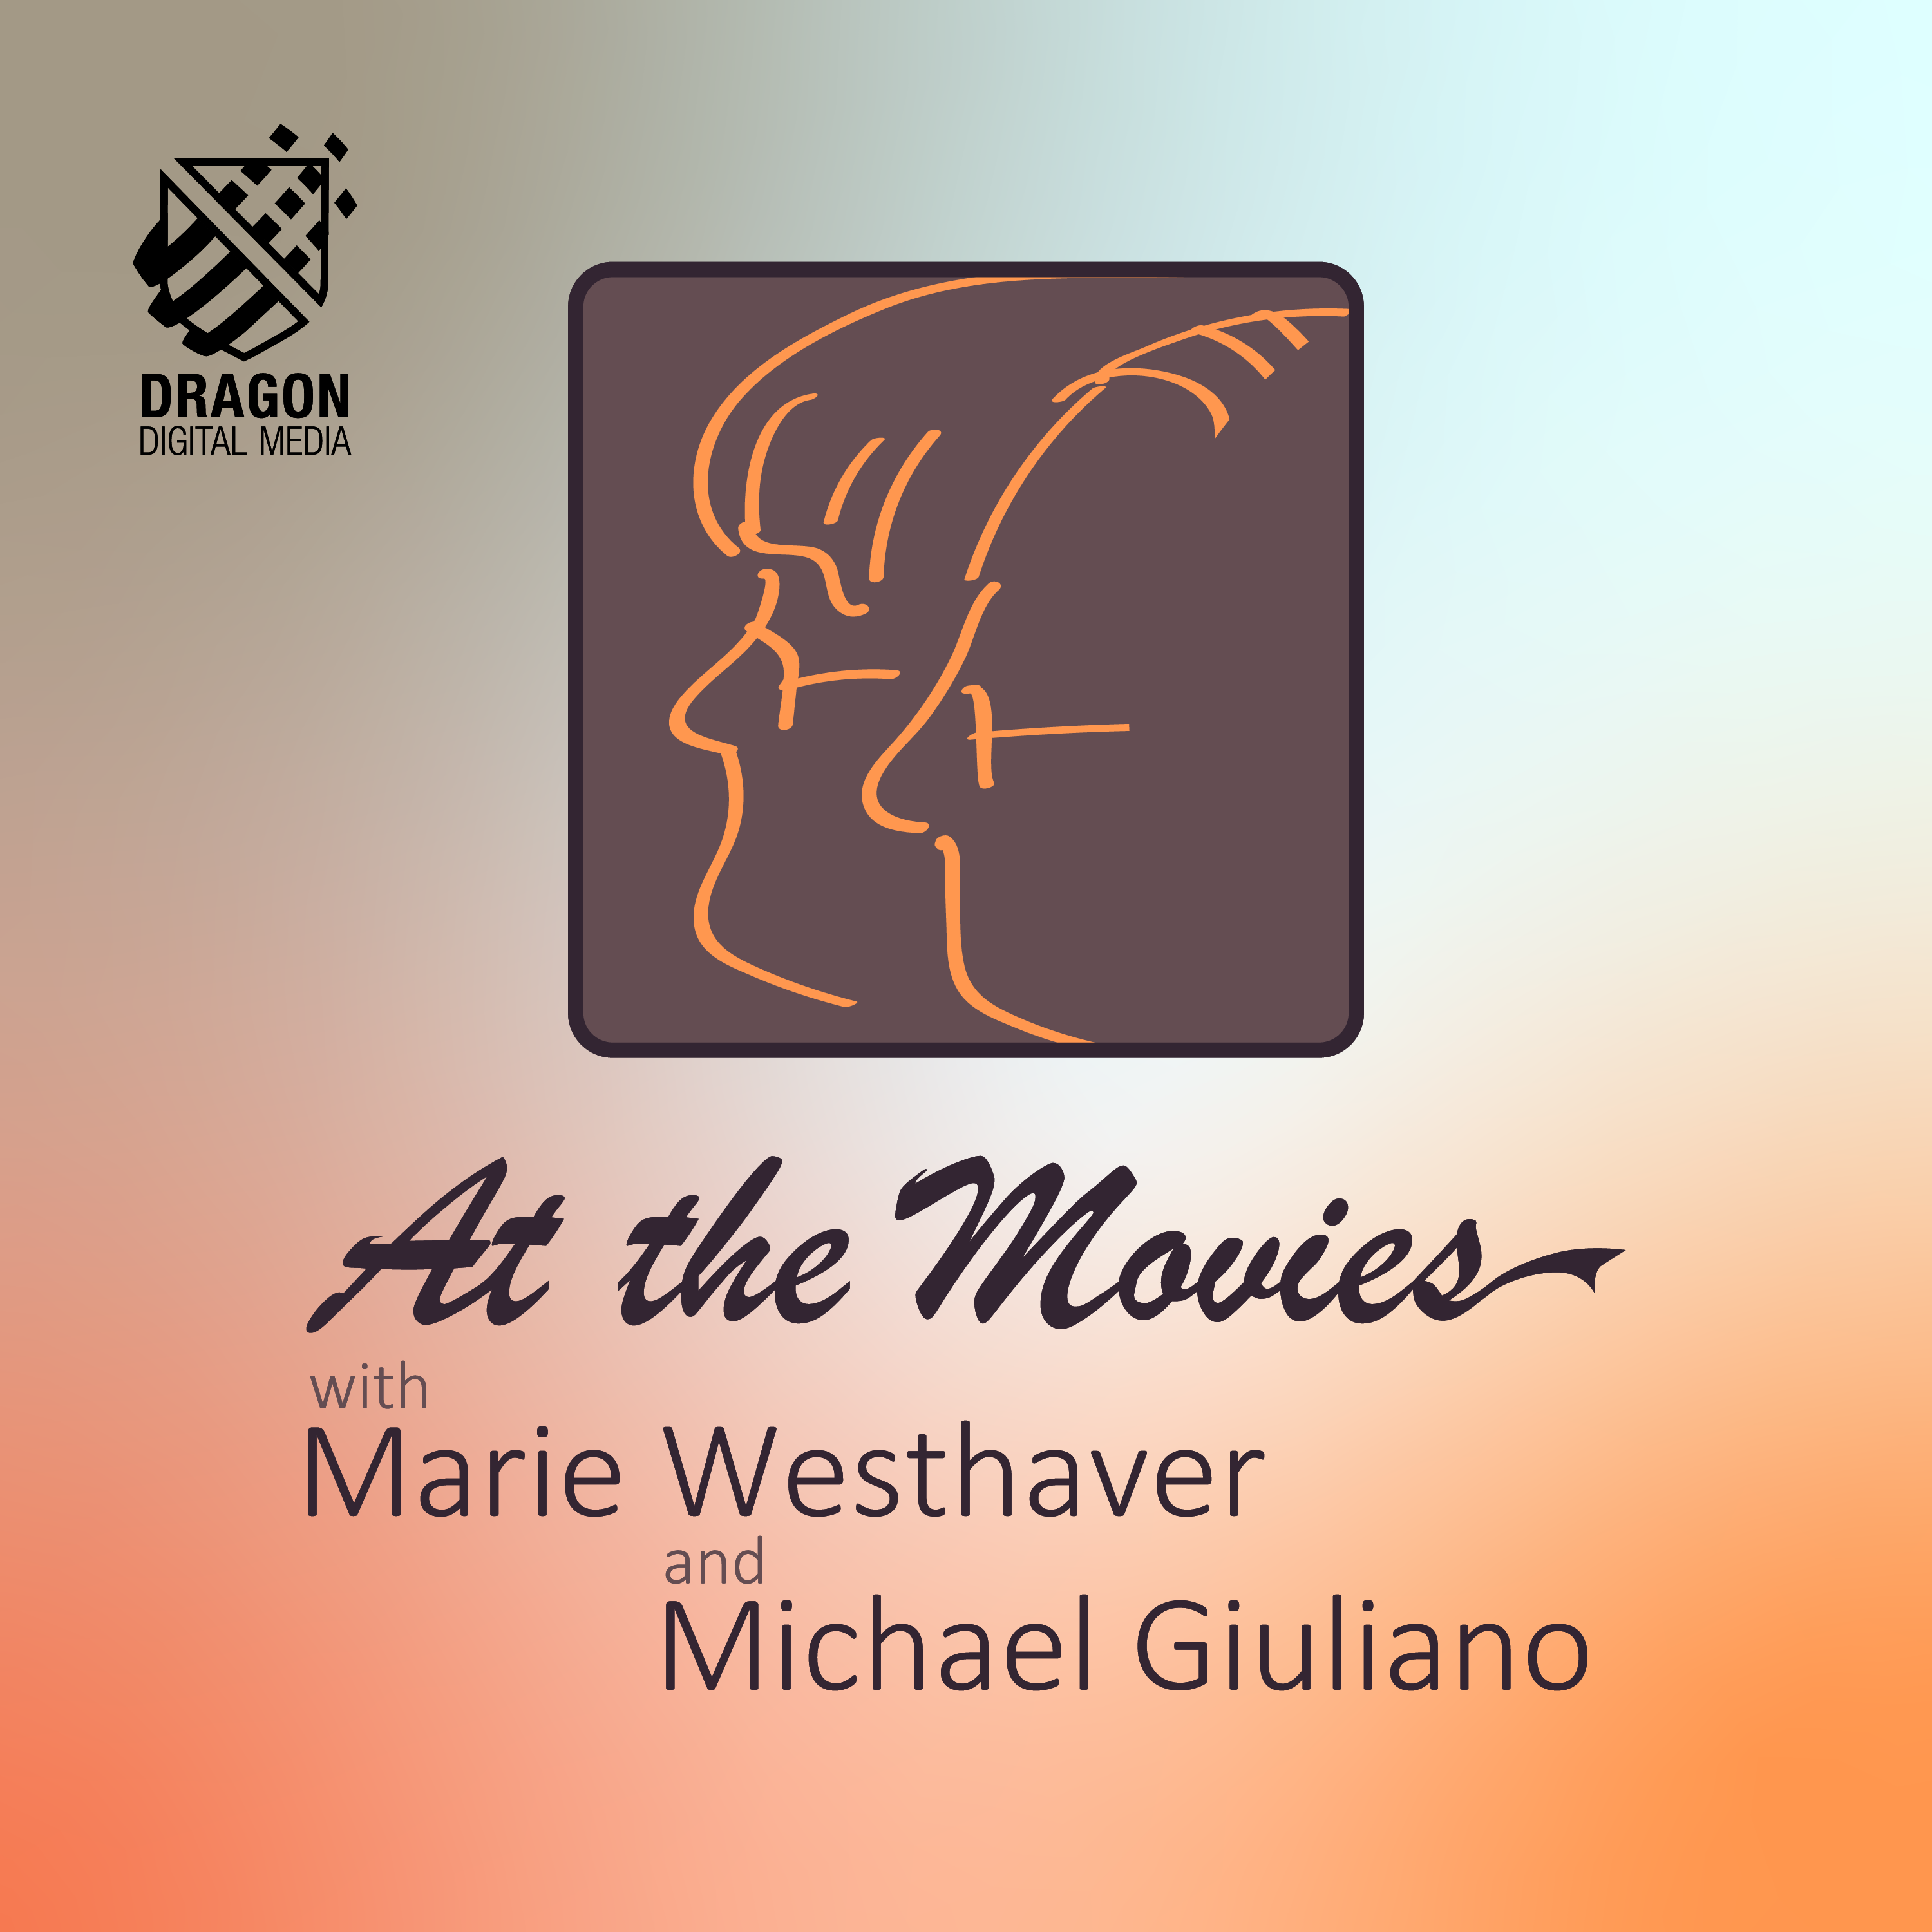 NOUSE_atTheMovies_color_PODCAST-01.png